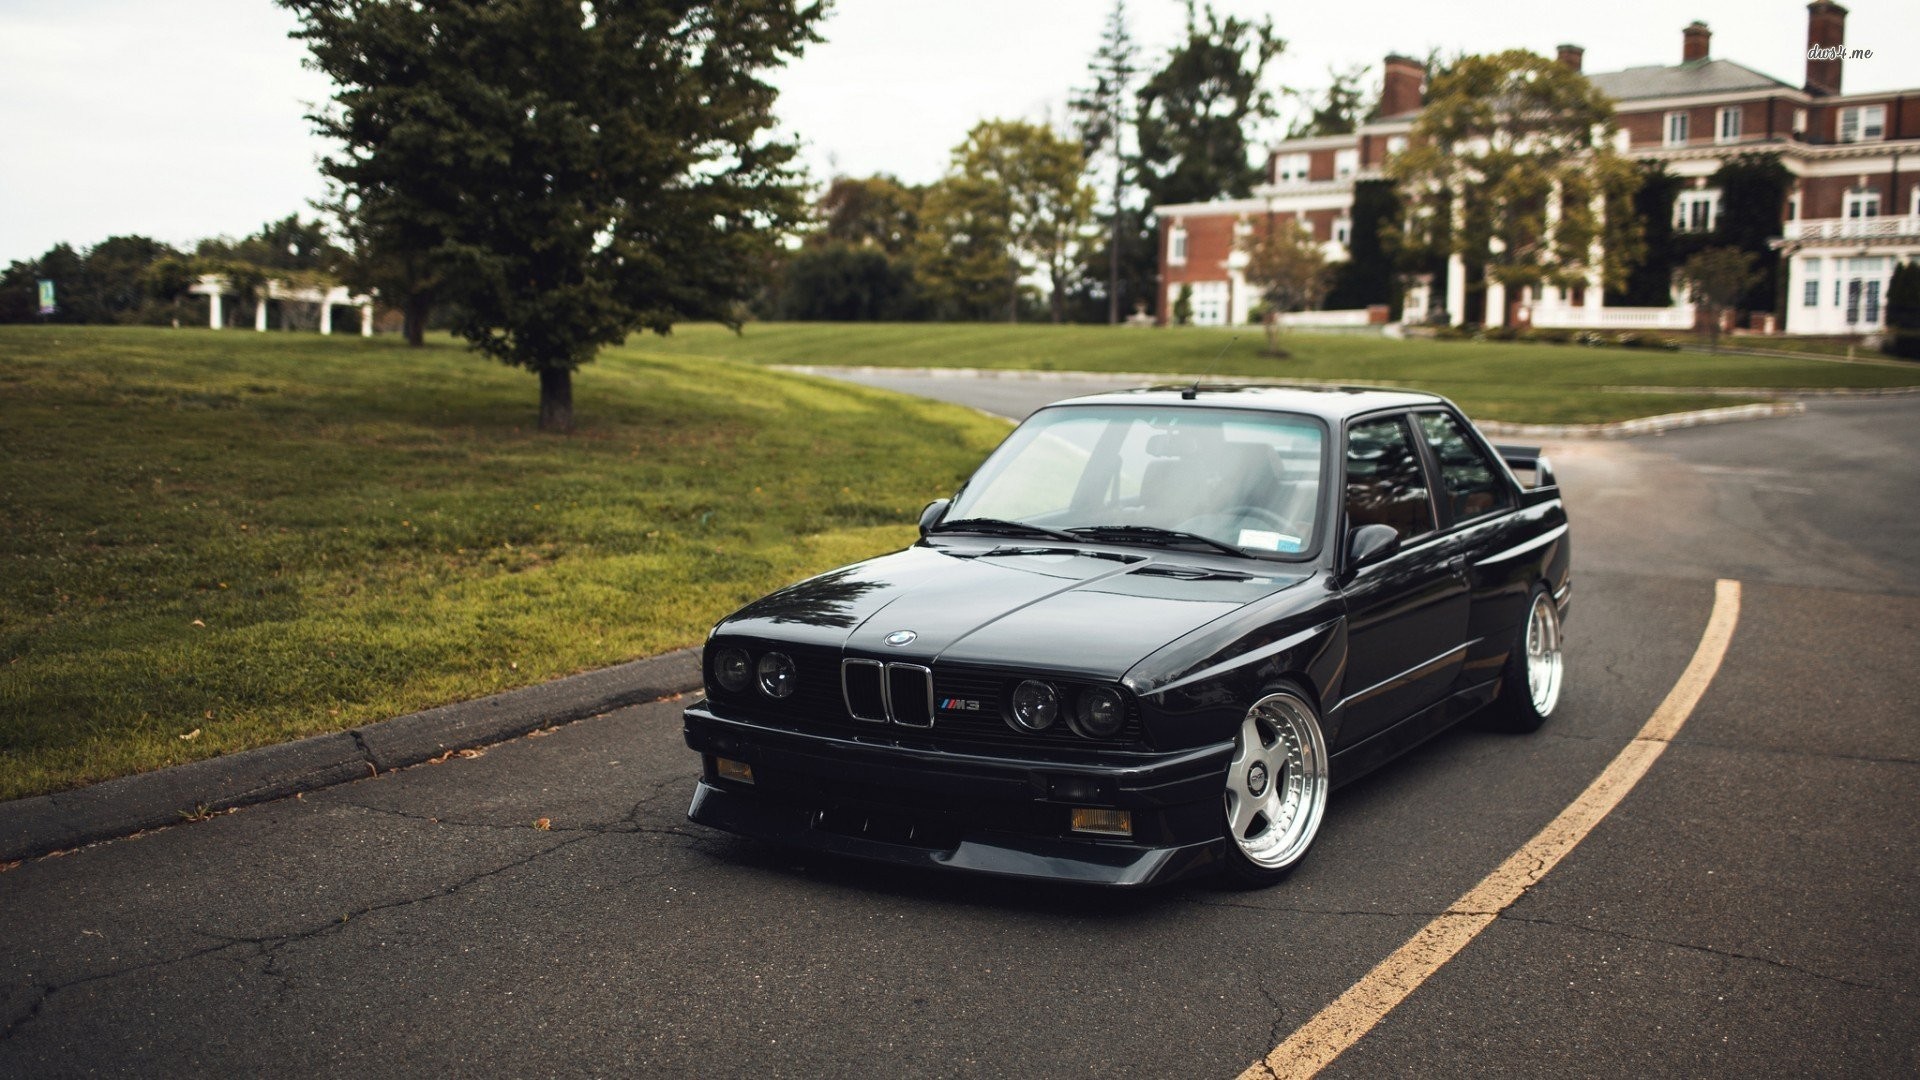 Download Bmw E30 M3 wallpapers for mobile phone free Bmw E30 M3 HD  pictures